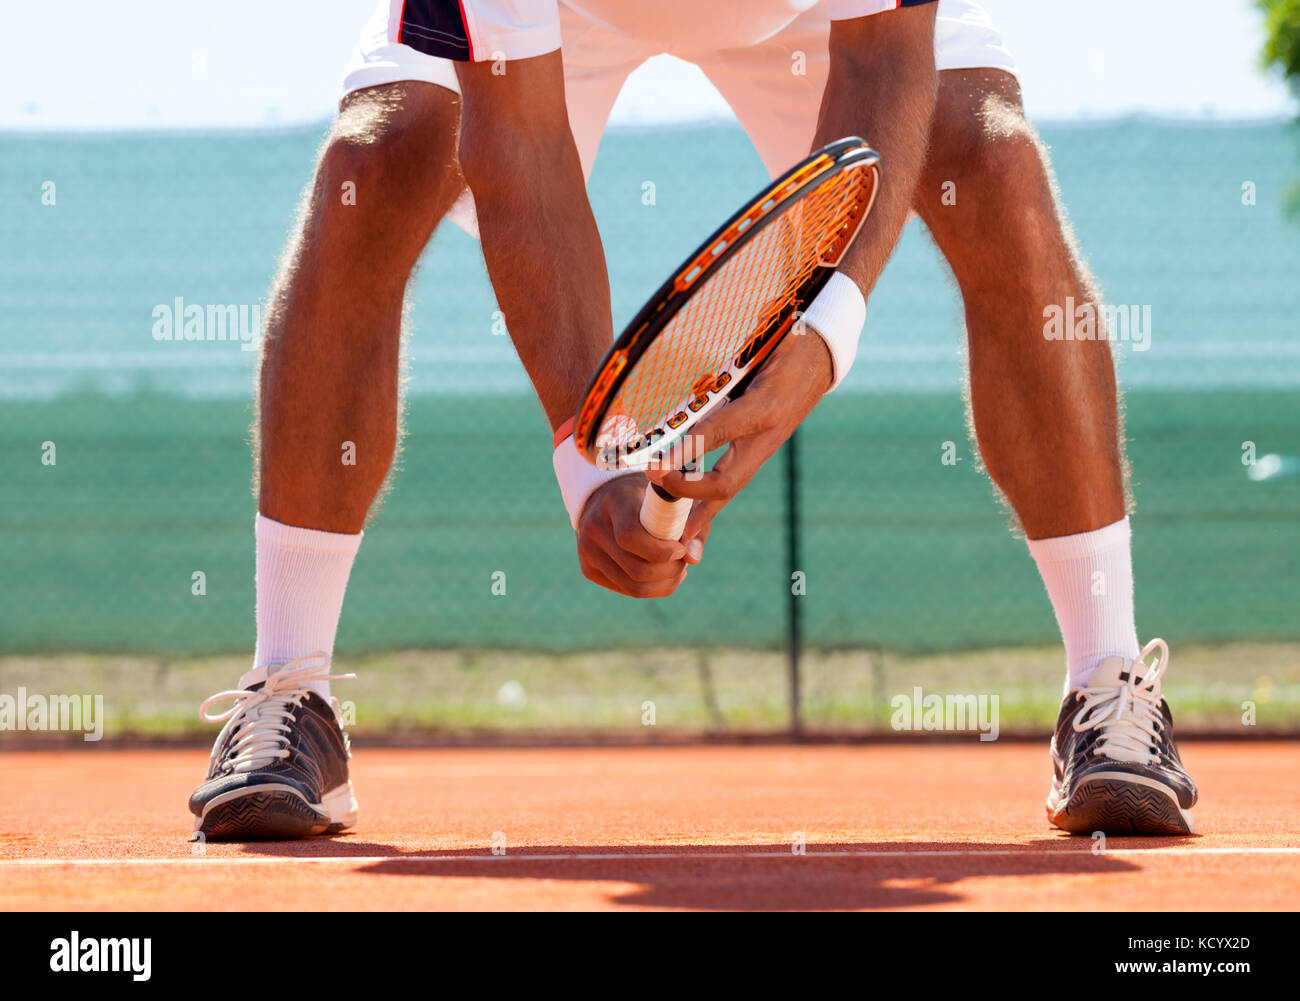 tennis court from low angle with Tennis player in action. Stock Photo